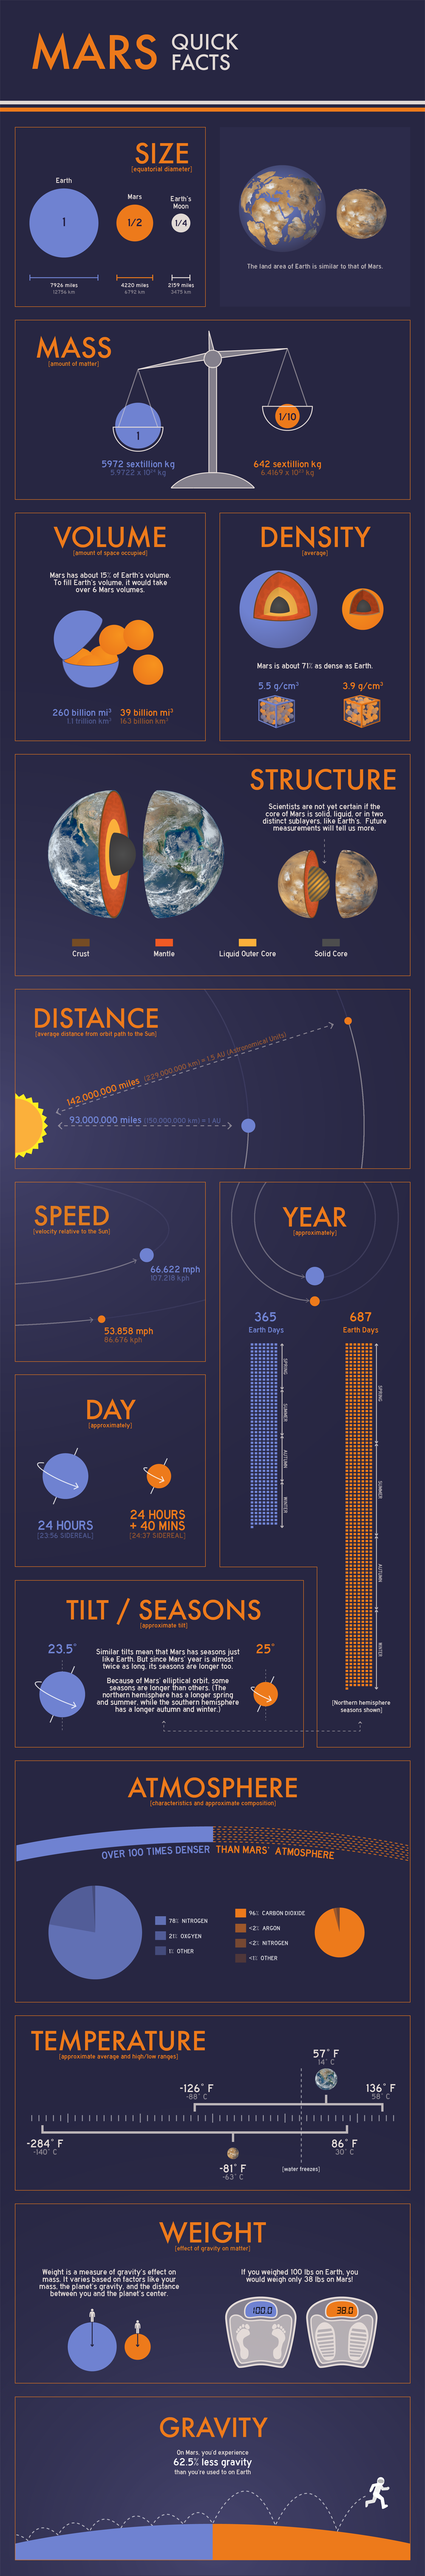 Mars: Quick Facts tall infographic